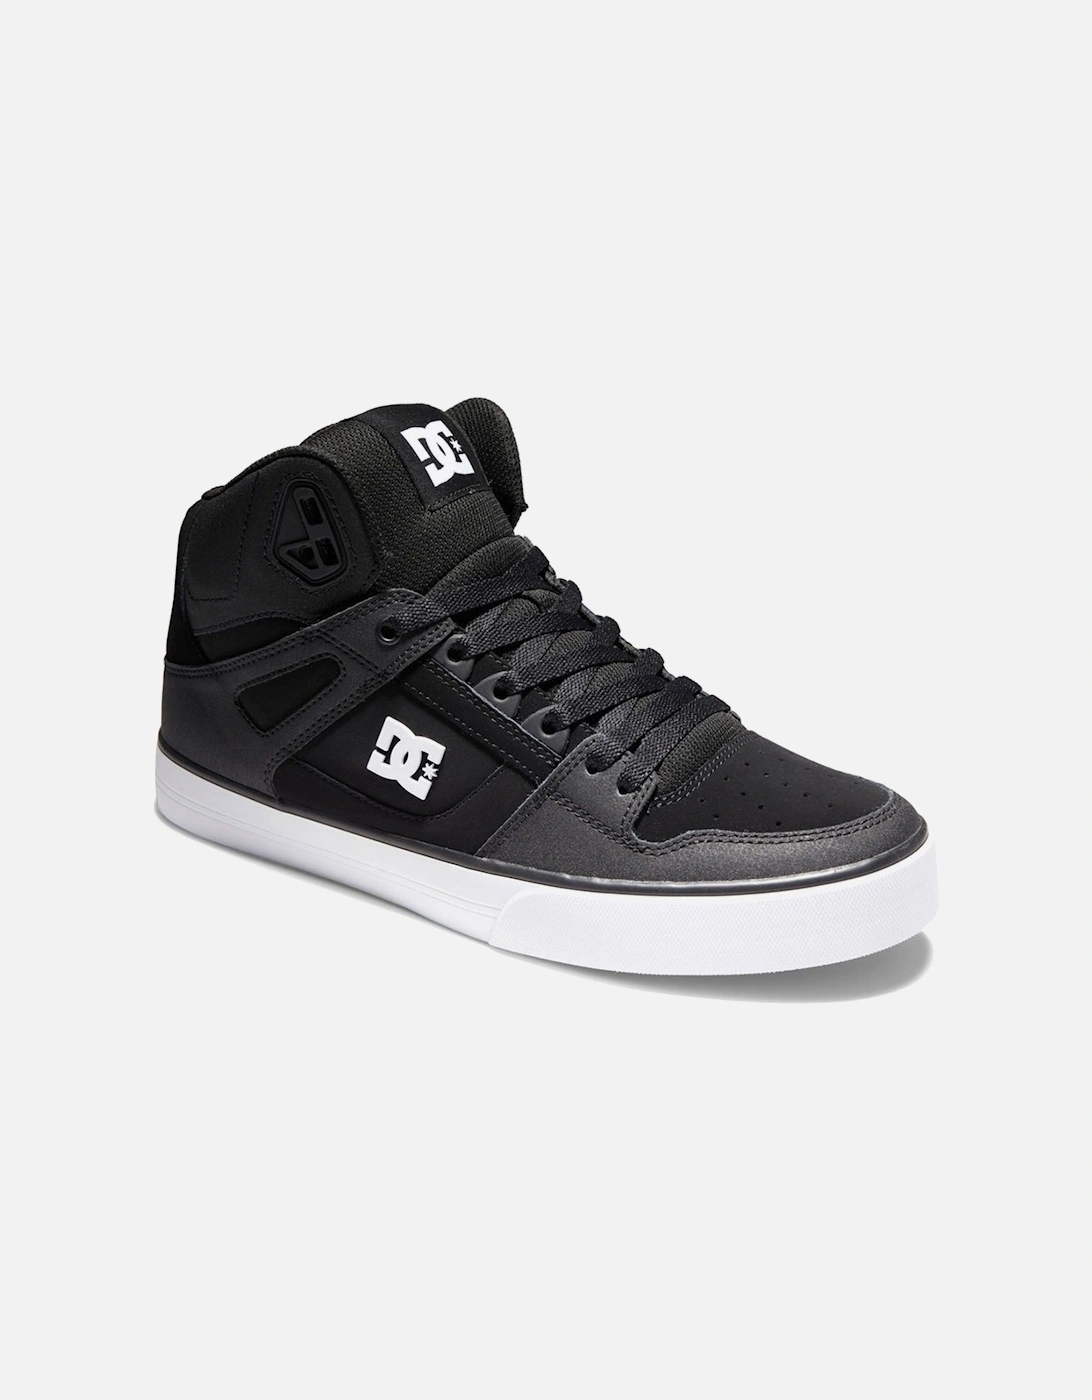 Mens Pure High Leather High Top Trainers